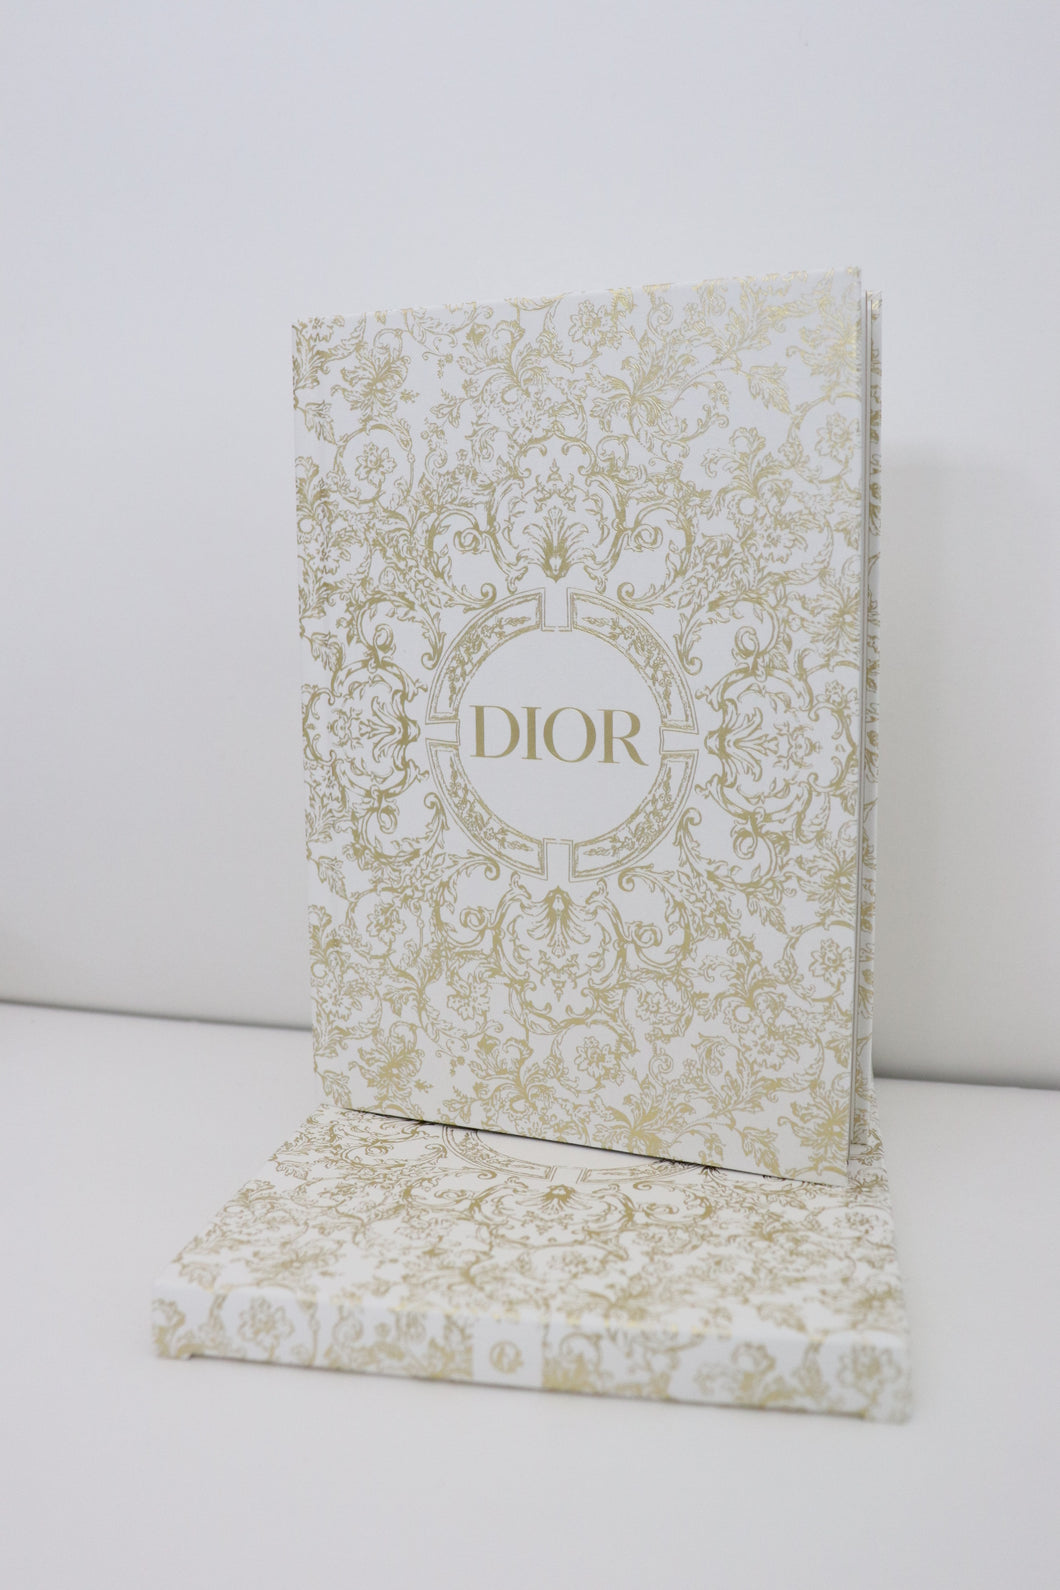 Christian Dior notebook (limited edition)